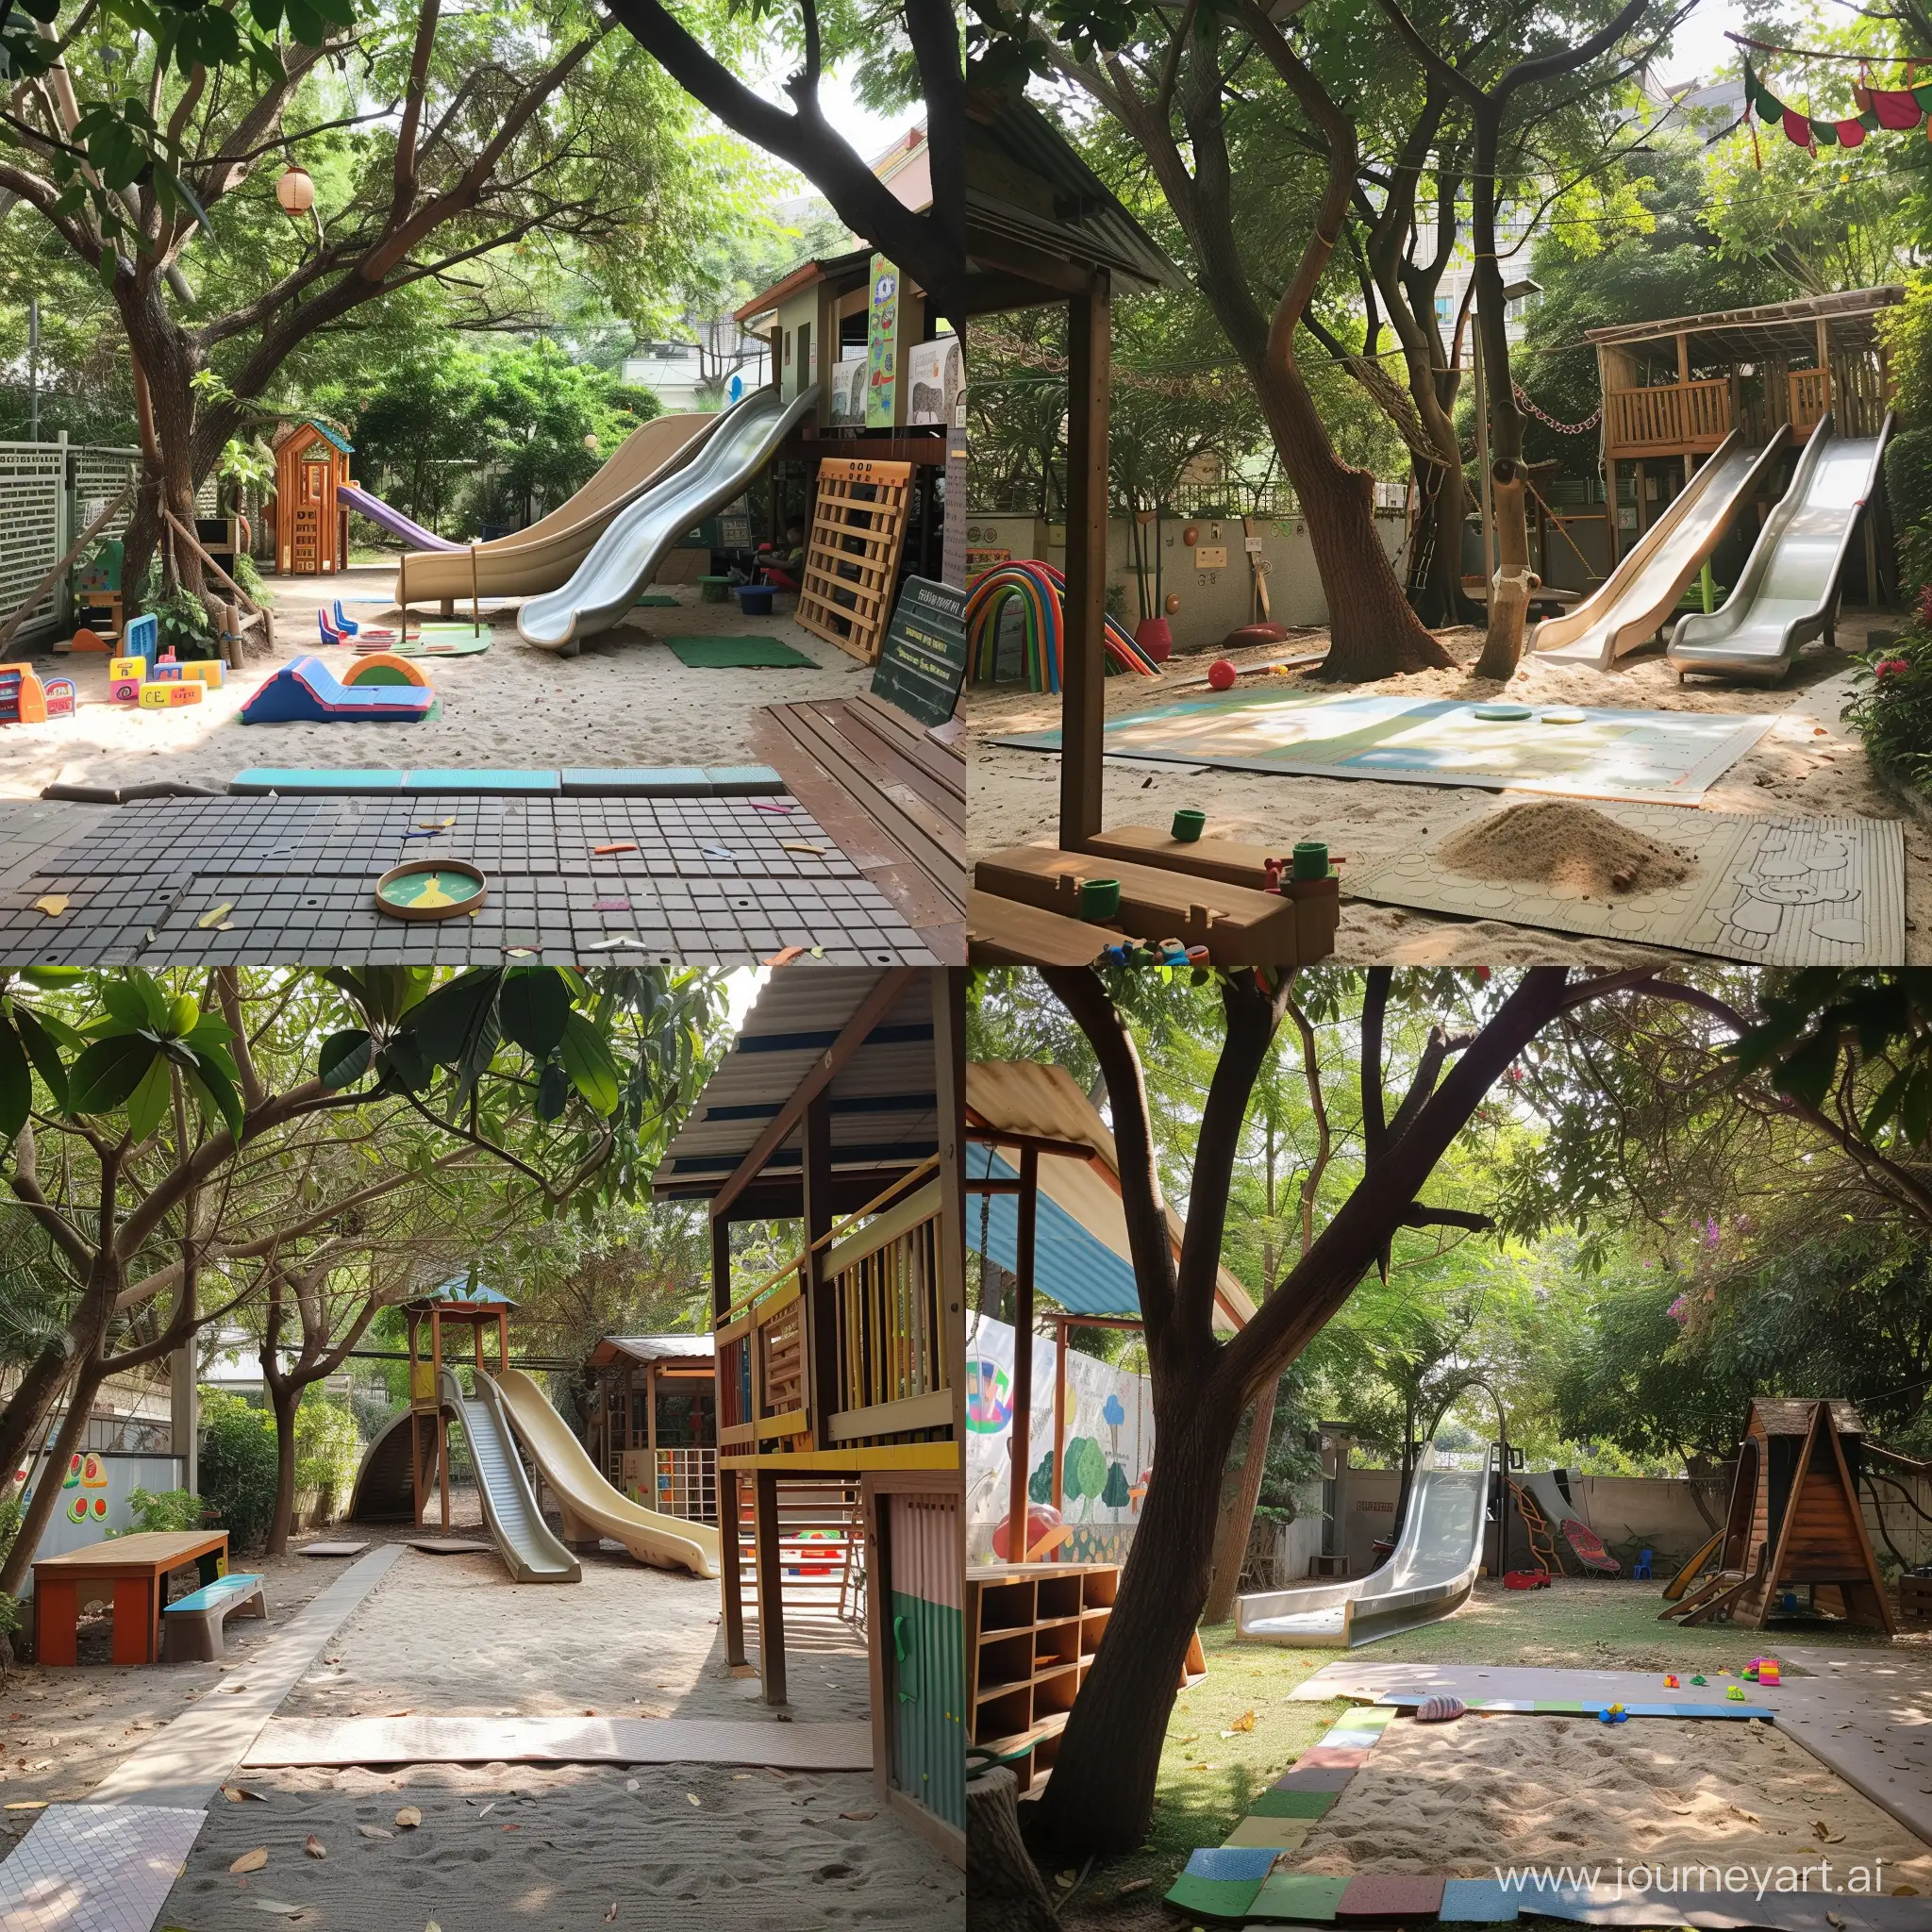 in a private childcare center  , outdoor yard very small, with a big slide under the trees，the slide was covered with mats so that no children can climb on it and play.  another side away from slide,   has  a tiny sandpit, sandpit no water allowed to play and very little toys in the sandpit, 





